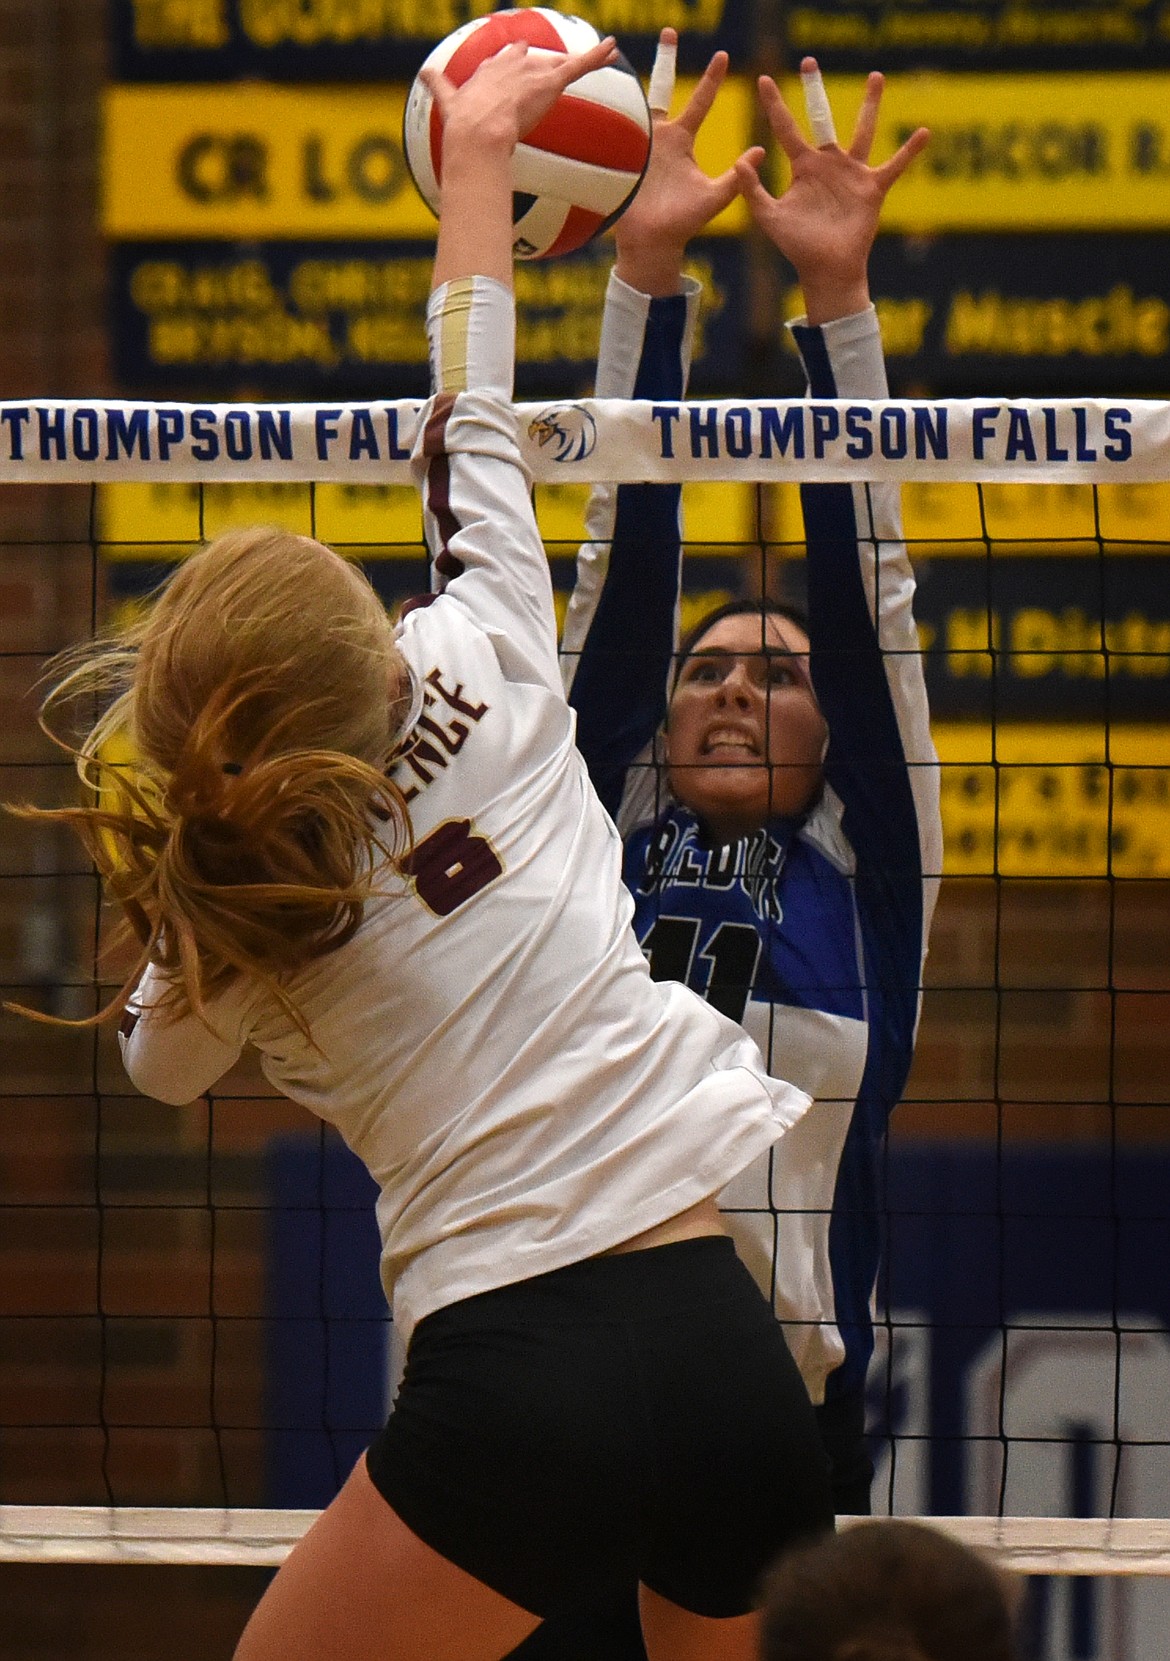 Mission's Rowan McElderry goes above the net to block an attack from Florence-Carlton's Elsie Schienter at the Western B Divisional volleyball tournament in Thompson Falls. (Jeremy Weber/Daily Inter Lake)